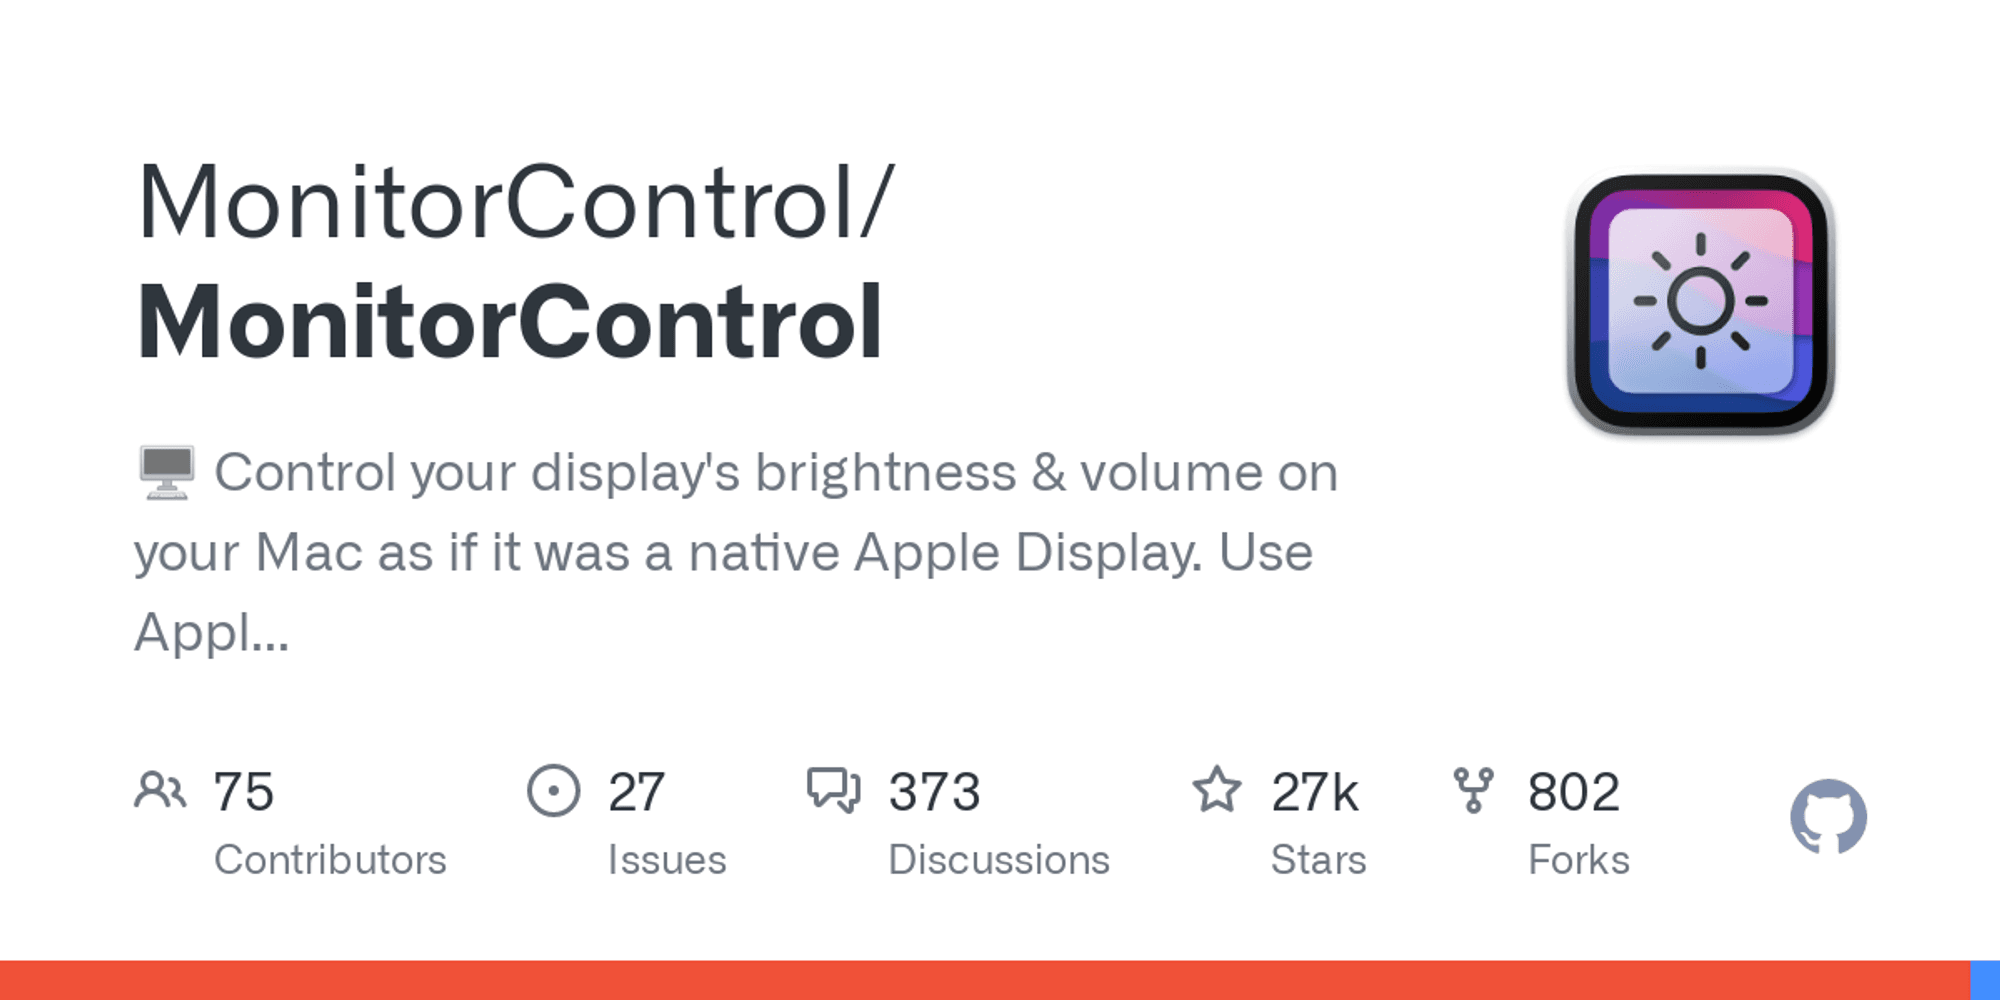 GitHub - MonitorControl/MonitorControl: 🖥 Control your display's brightness & volume on your Mac as if it was a native Apple Display. Use Apple Keyboard keys or custom shortcuts. Shows the native macOS OSDs.